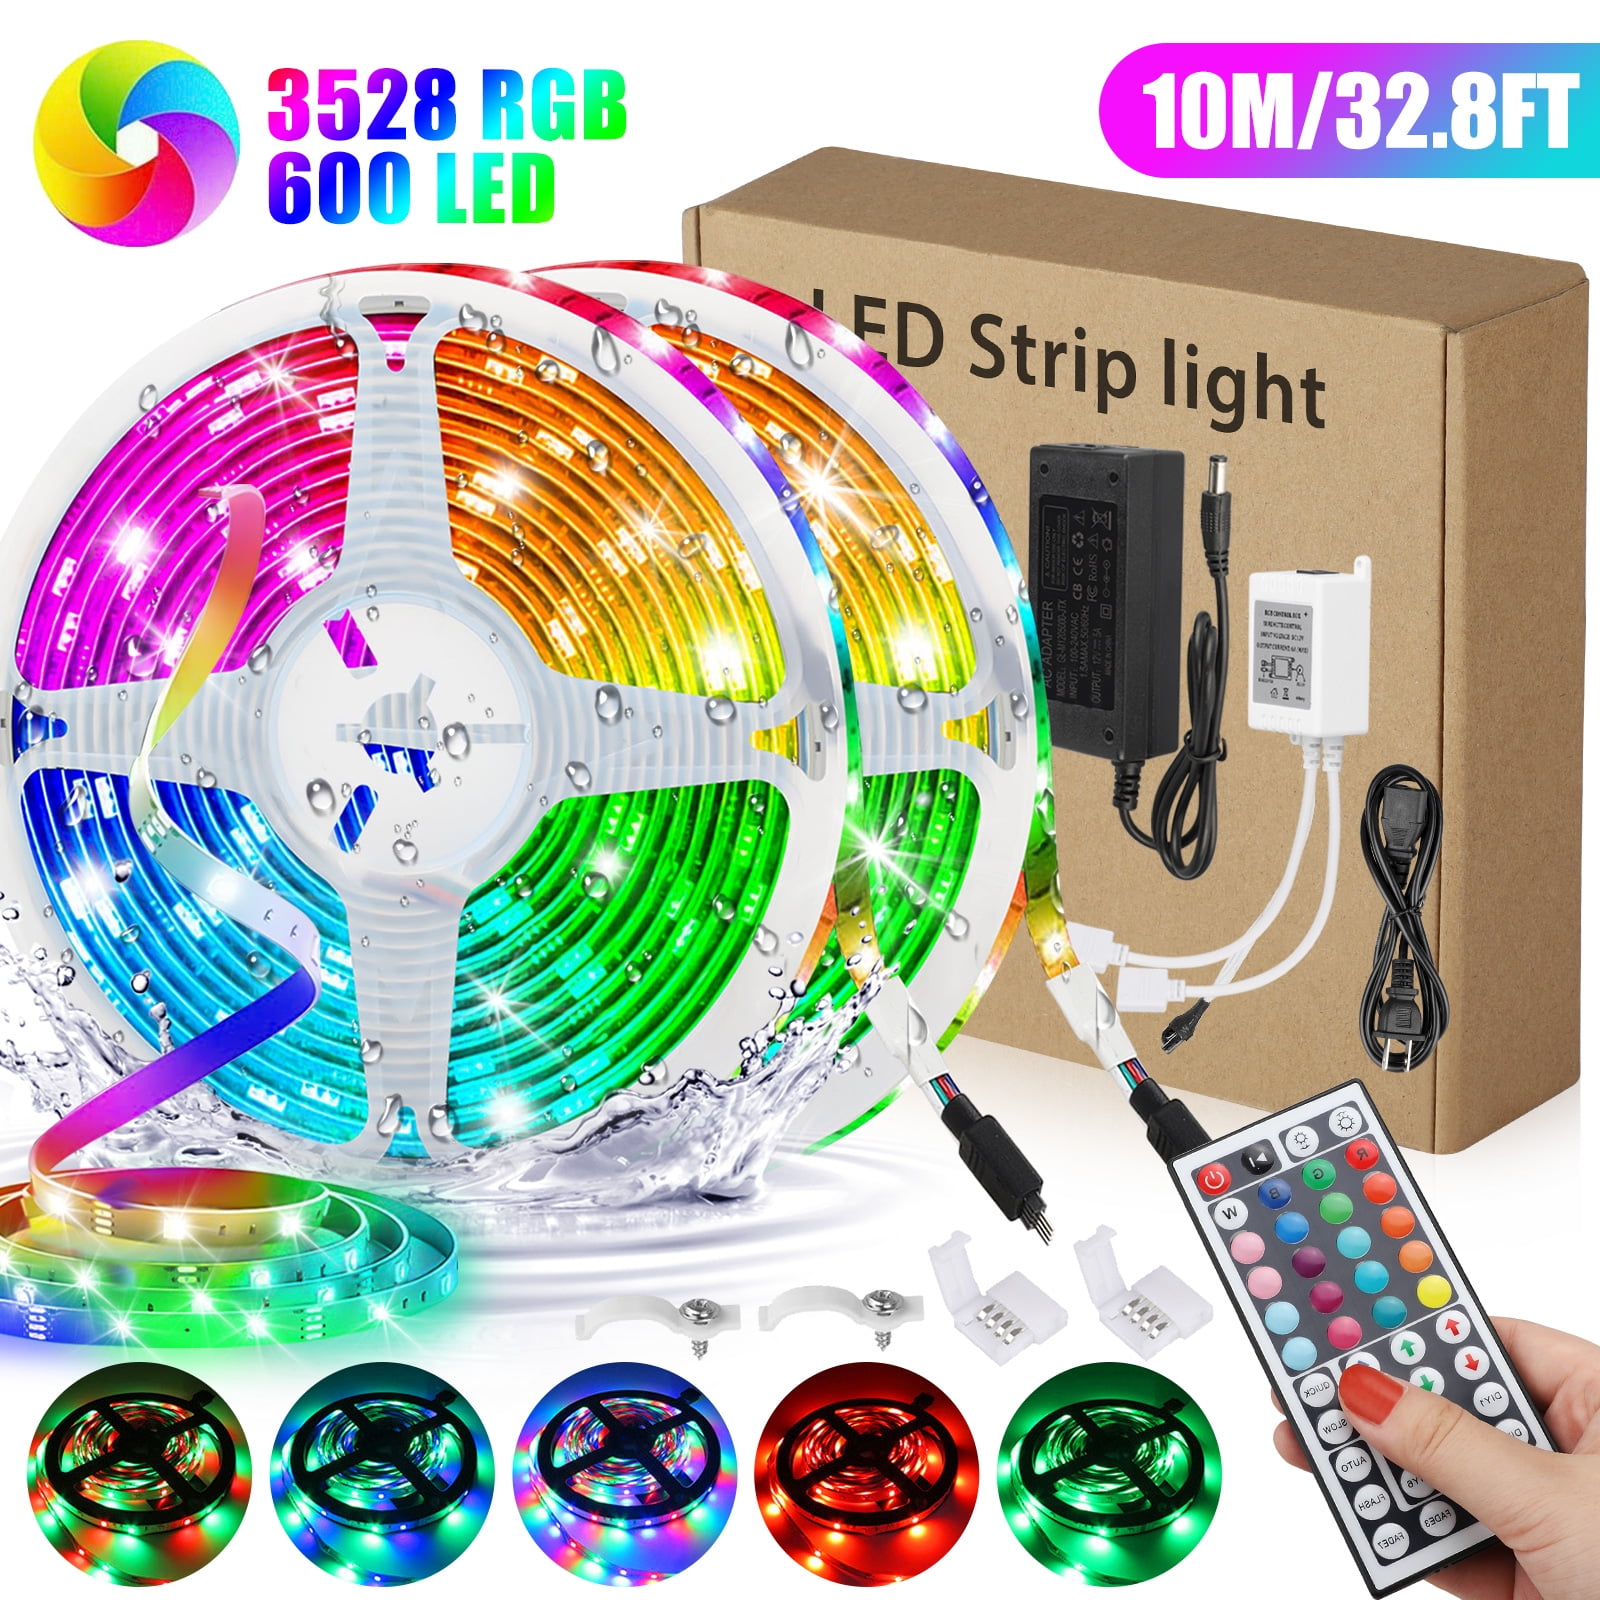 Details about   High Quality New 32.8 ft Led Strip Lights RGB Color Changing for any Room 12V 